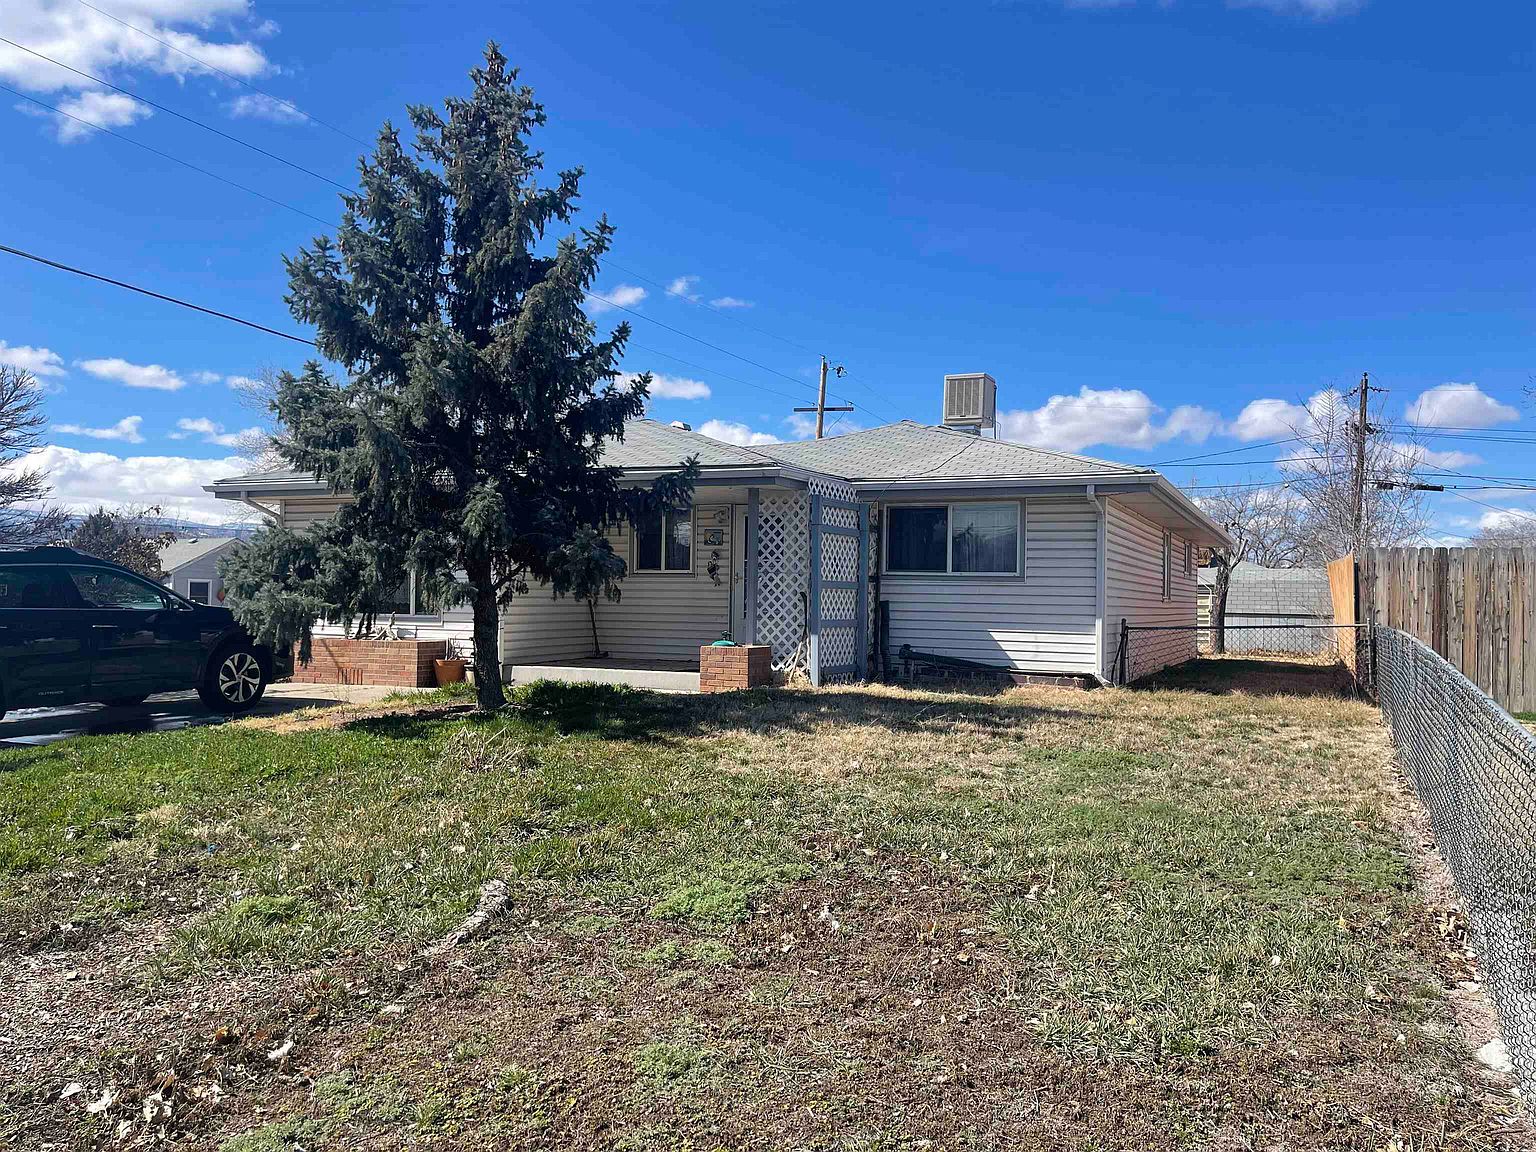 403 N 25th St, Grand Junction, CO 81501 Zillow